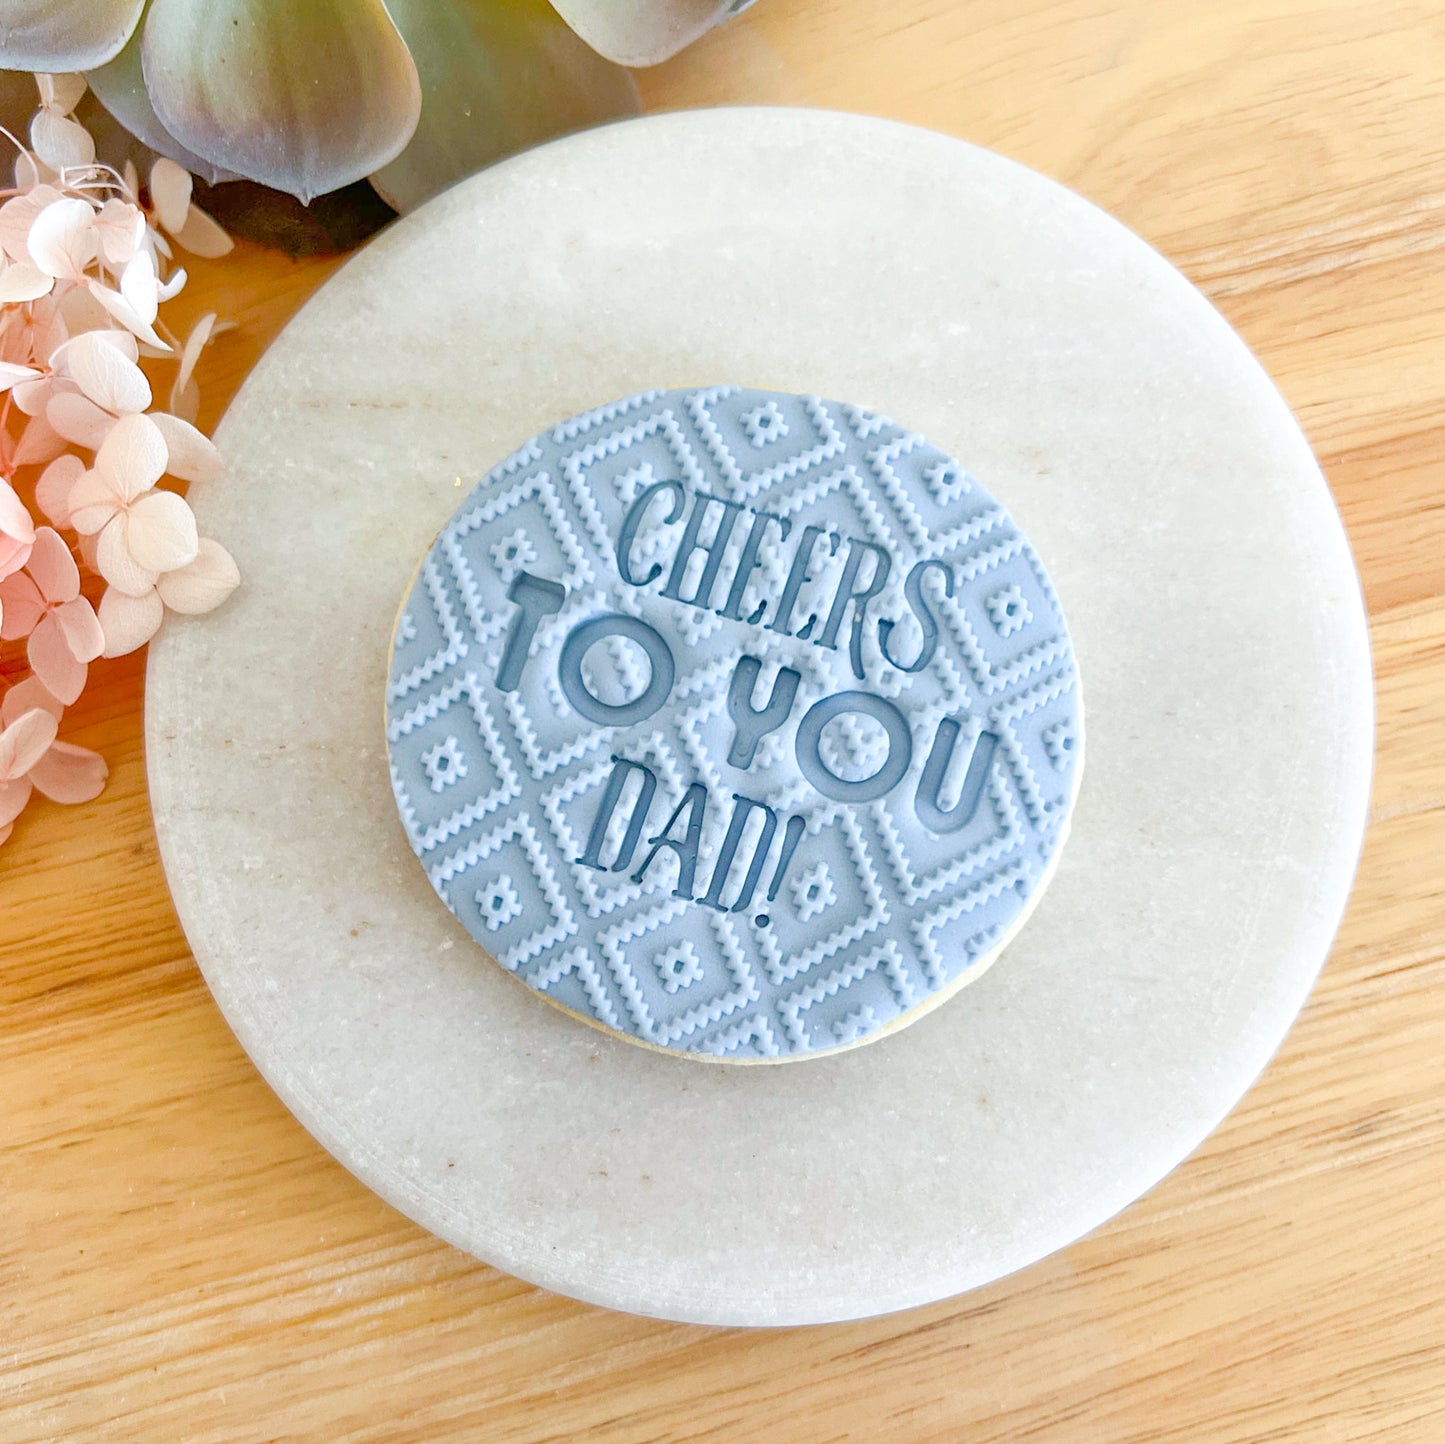 Cheers to You Dad! - Emboss Stamp